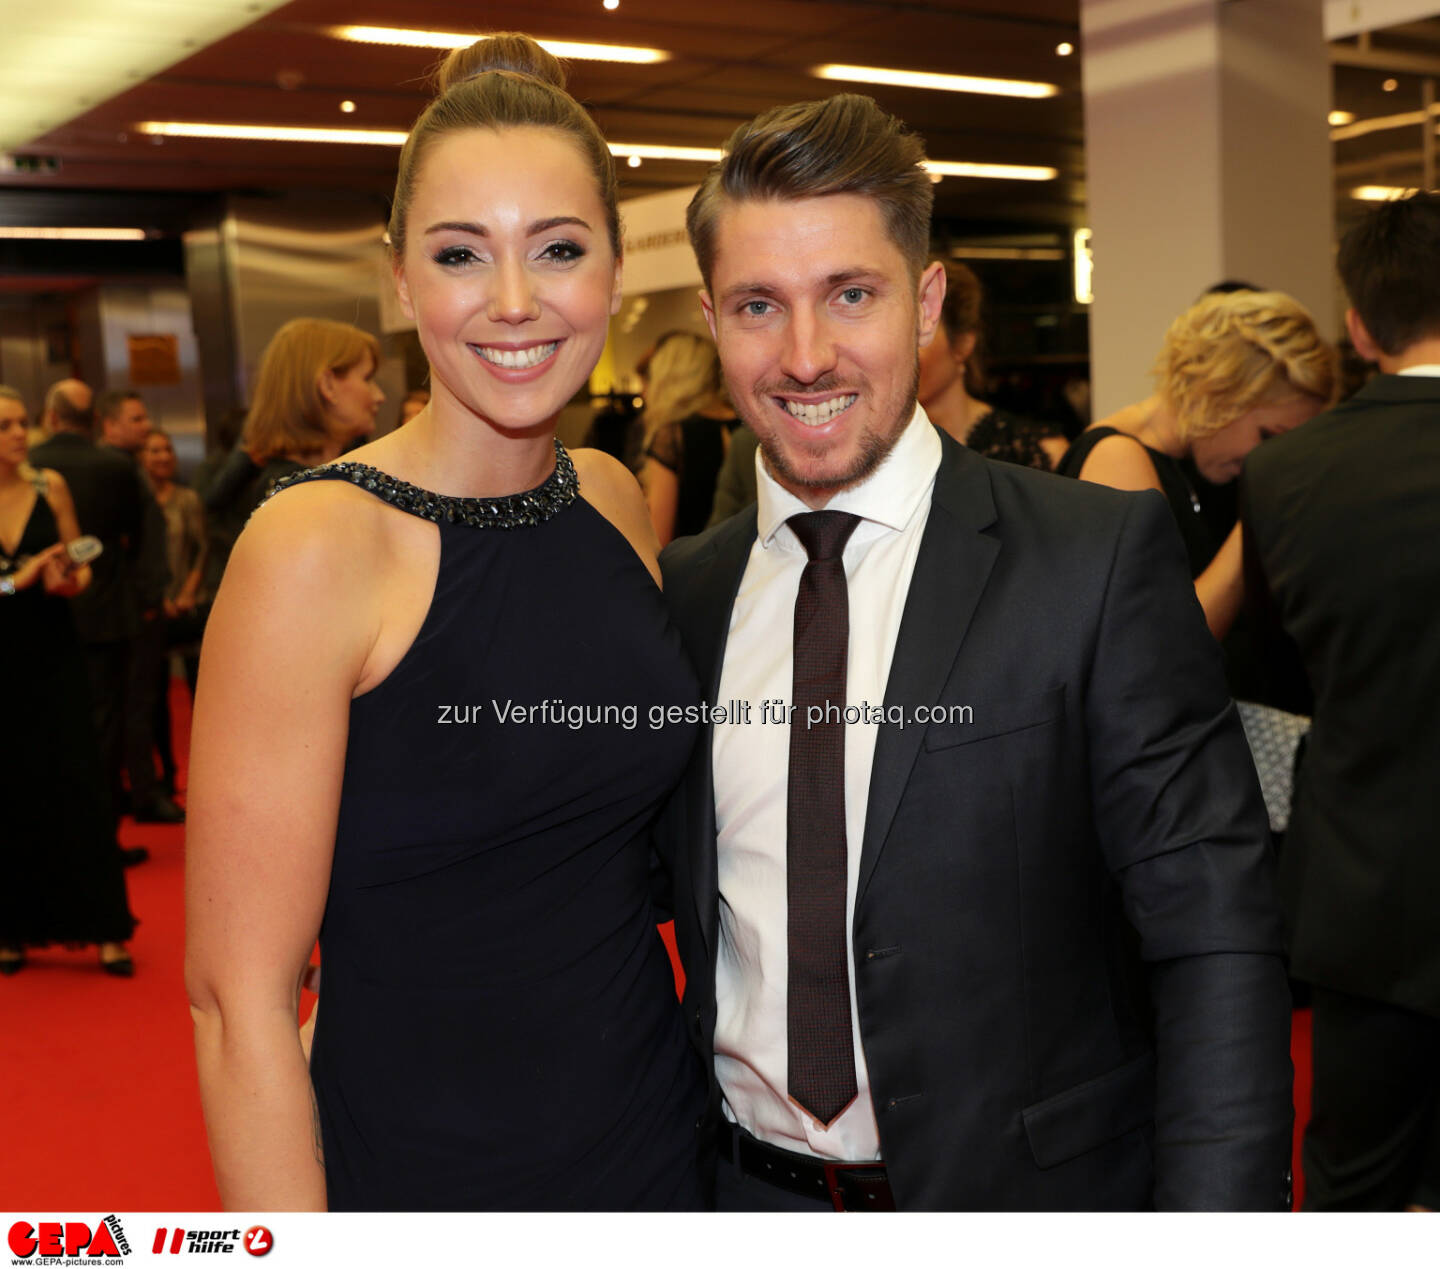 Marcel Hirscher (AUT) and Laura Photo: GEPA pictures/ Walter Luger